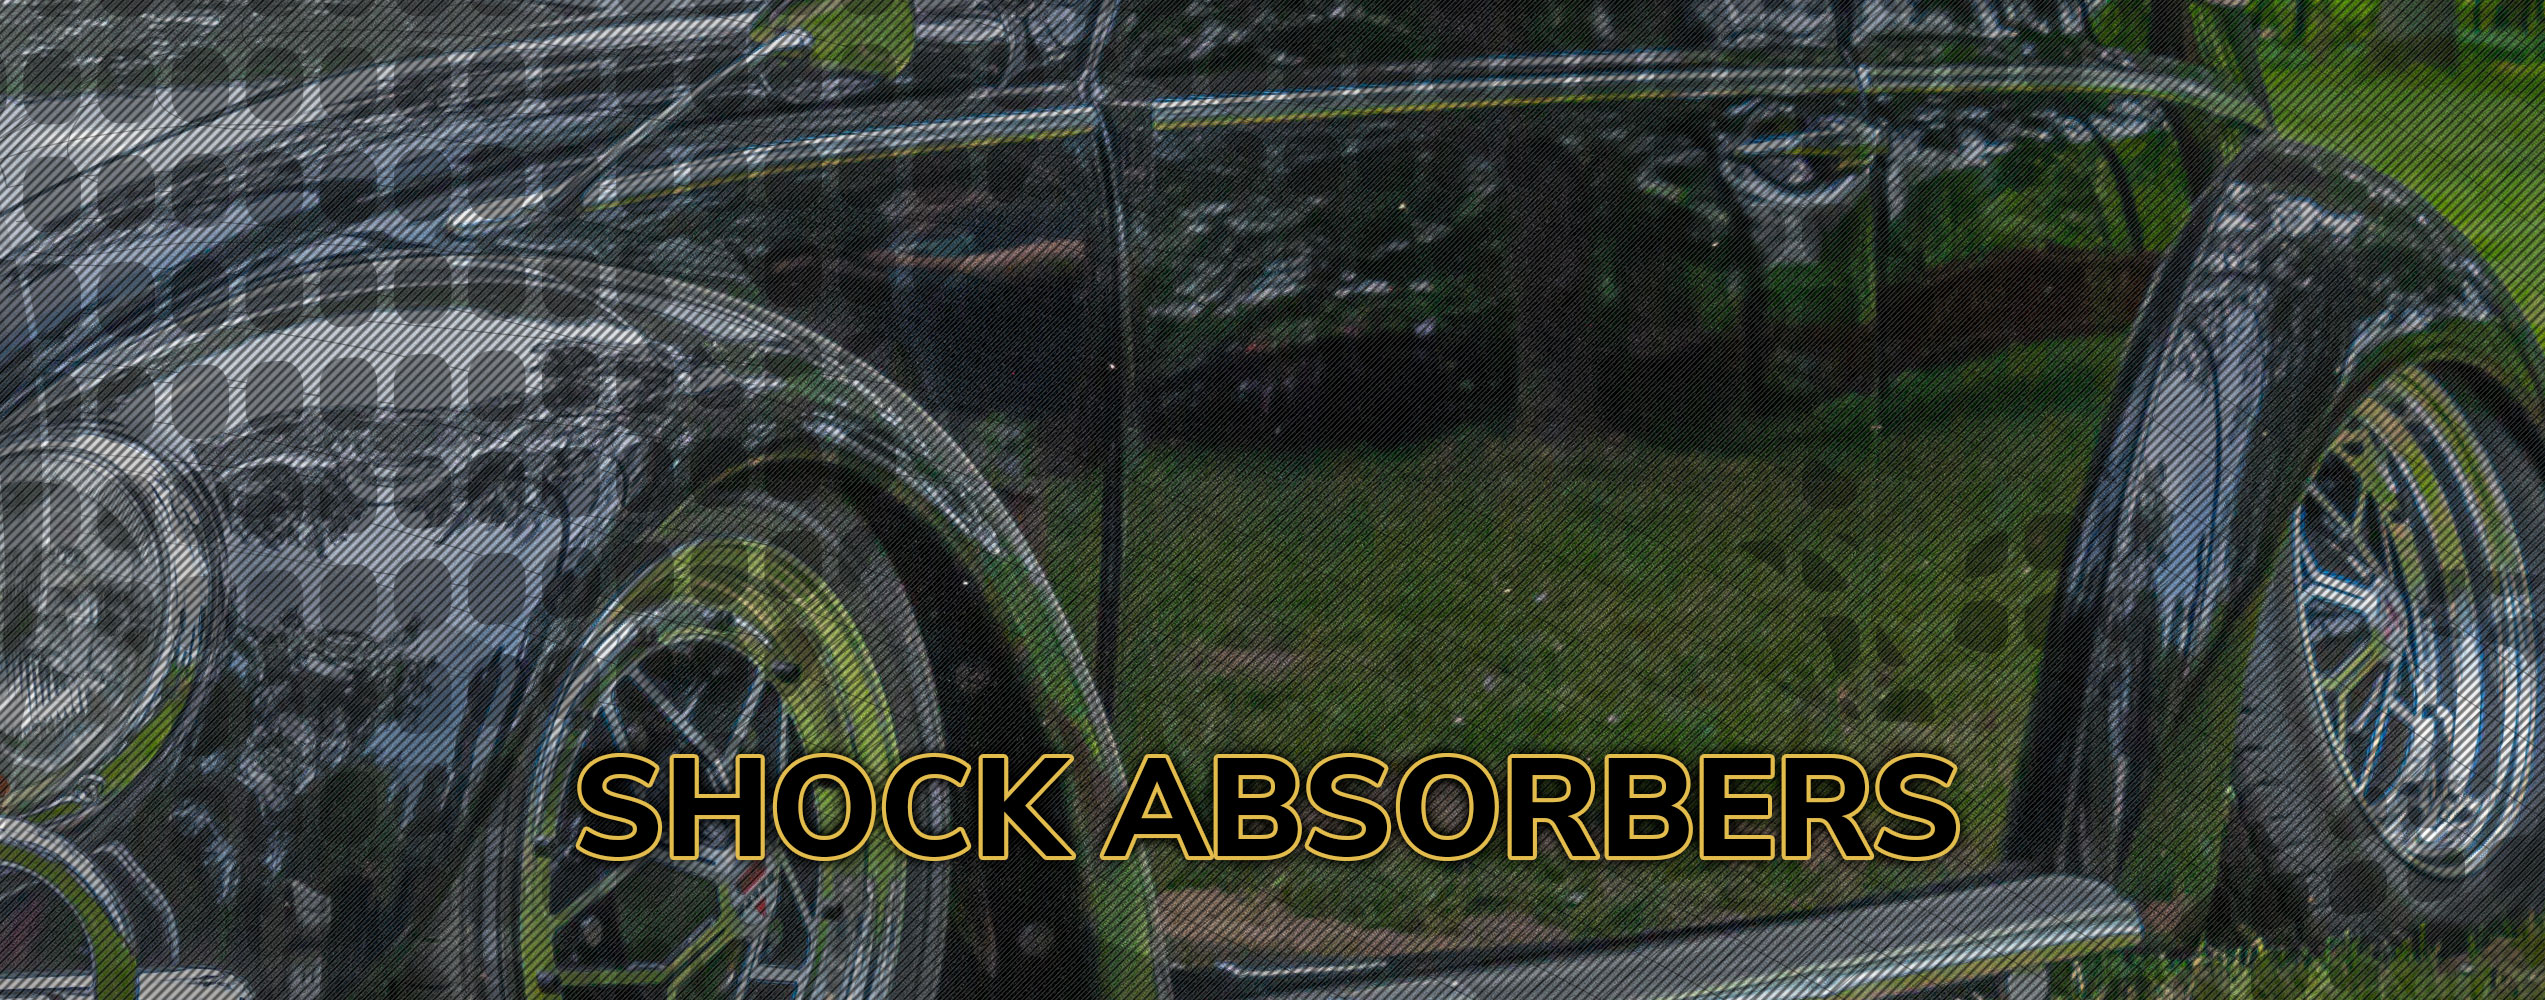 Rob’s Guide to Shock Absorbers